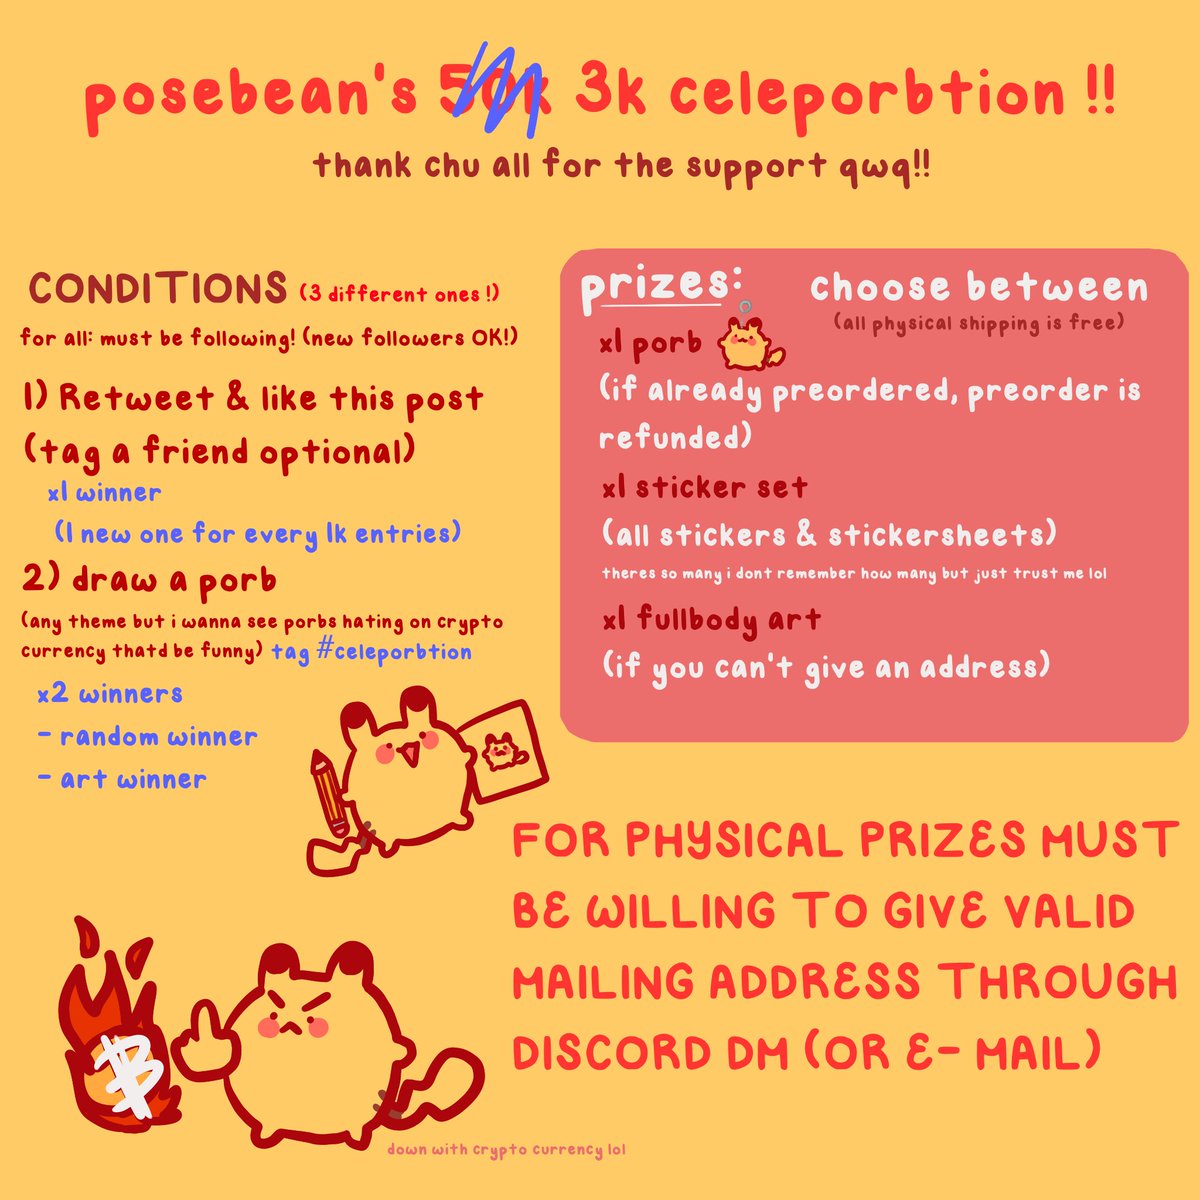 1209
celeporbtion!!!! 
more details in thread and in alt text :3